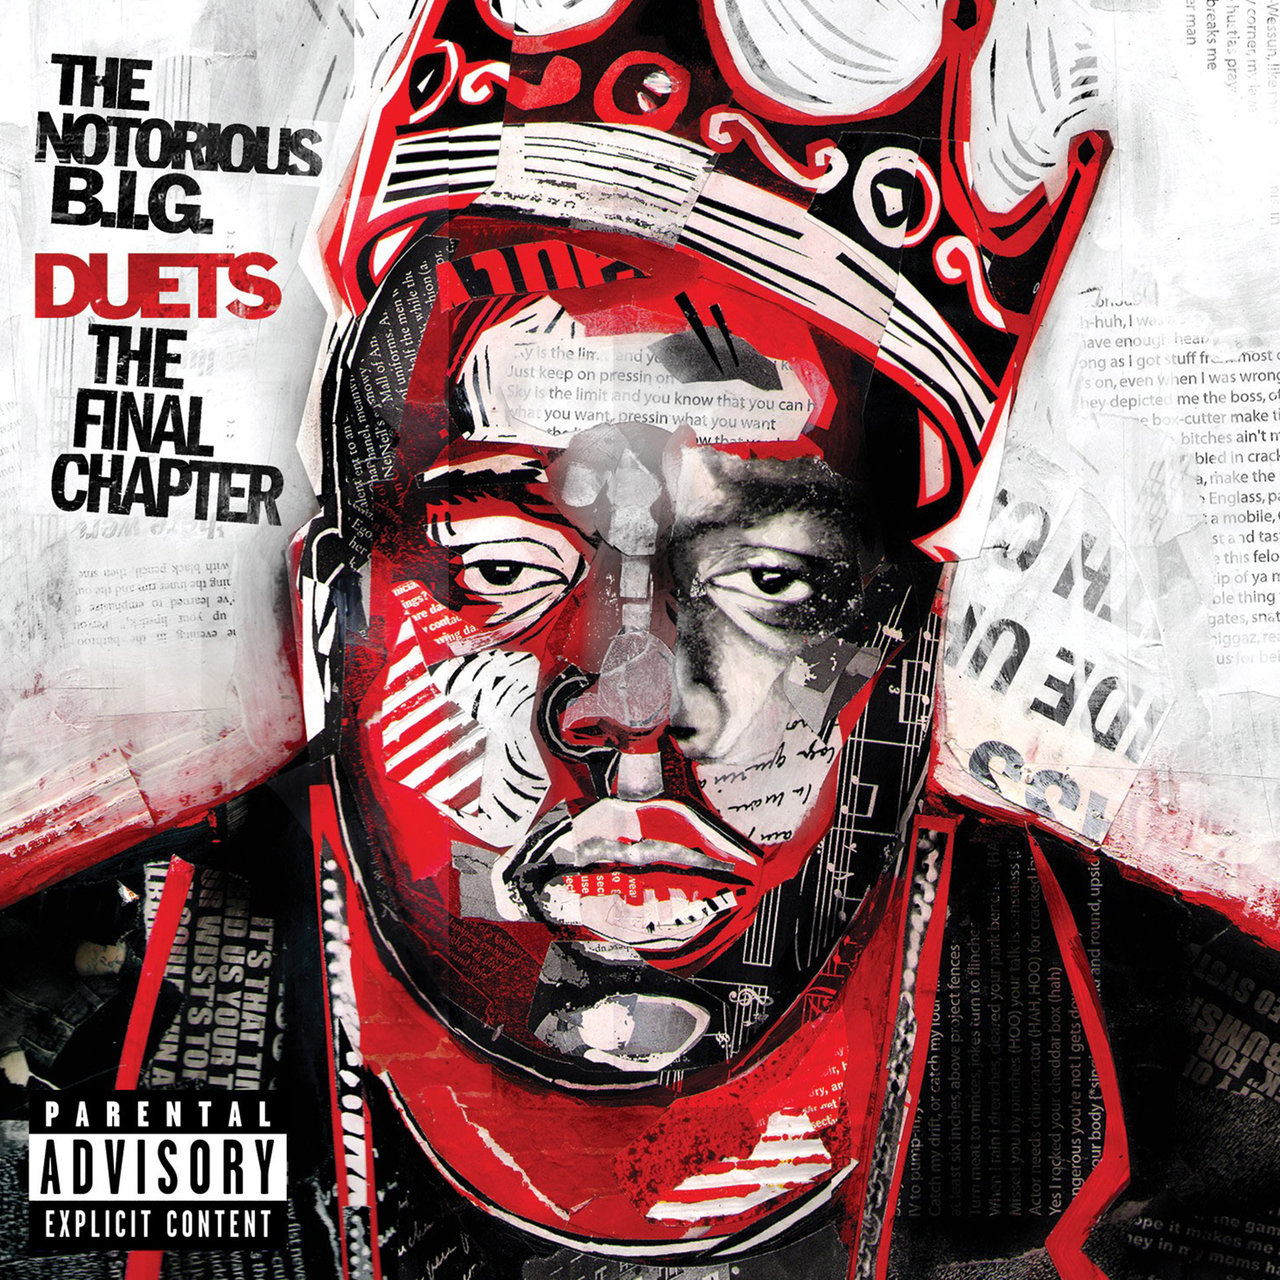 The Notorious B.I.G. - Duets: The Final Chapter (Cover)